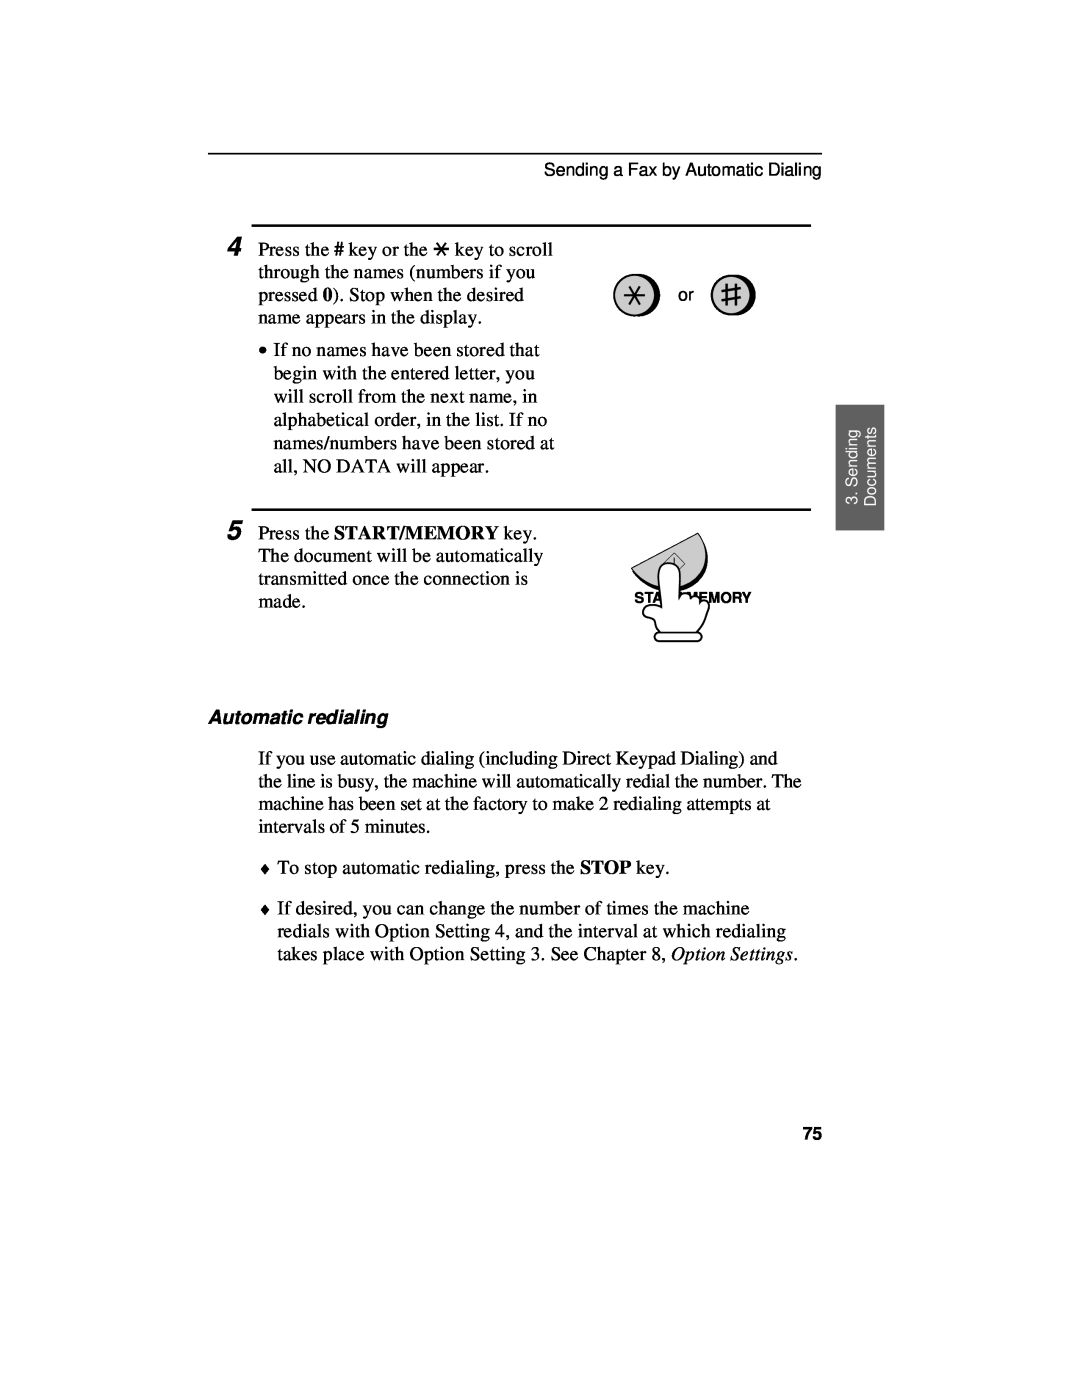 Sharp UX-460 operation manual made, Automatic redialing 